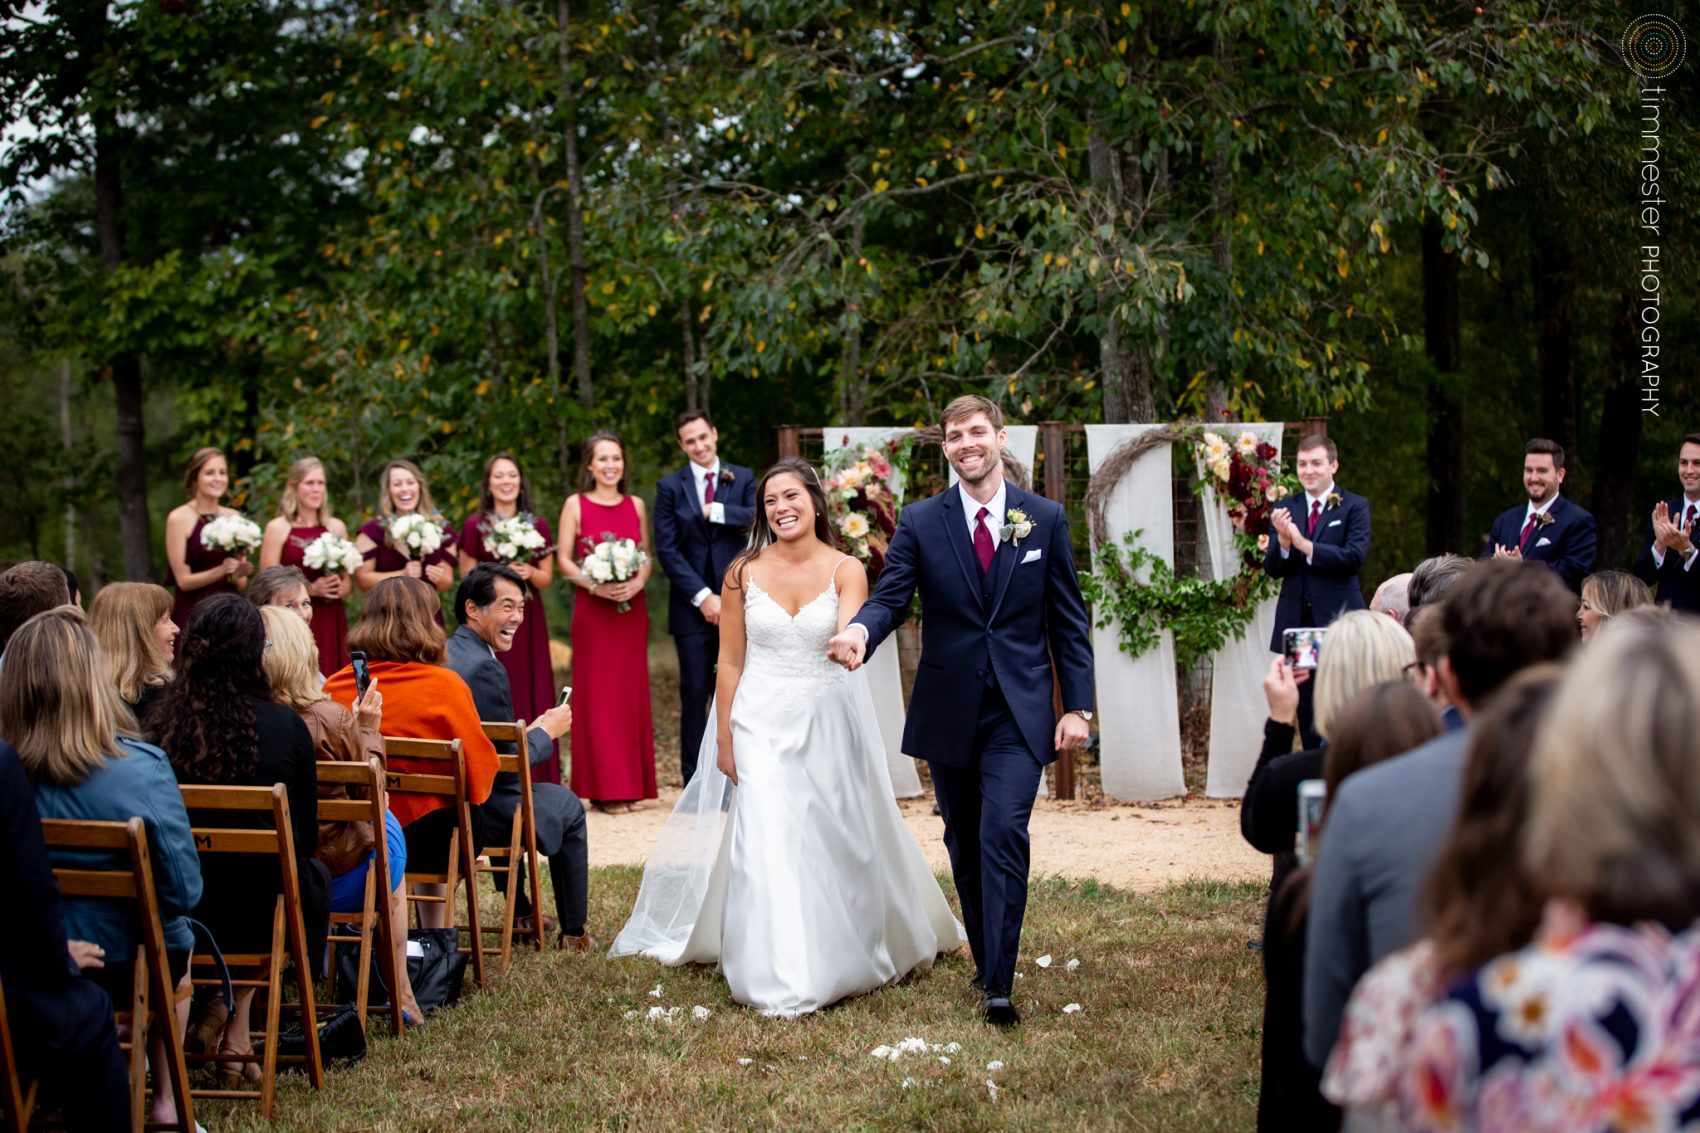 A bride and groom after their ceremony at Sassafras Fork Farm in Rougemont, NC.